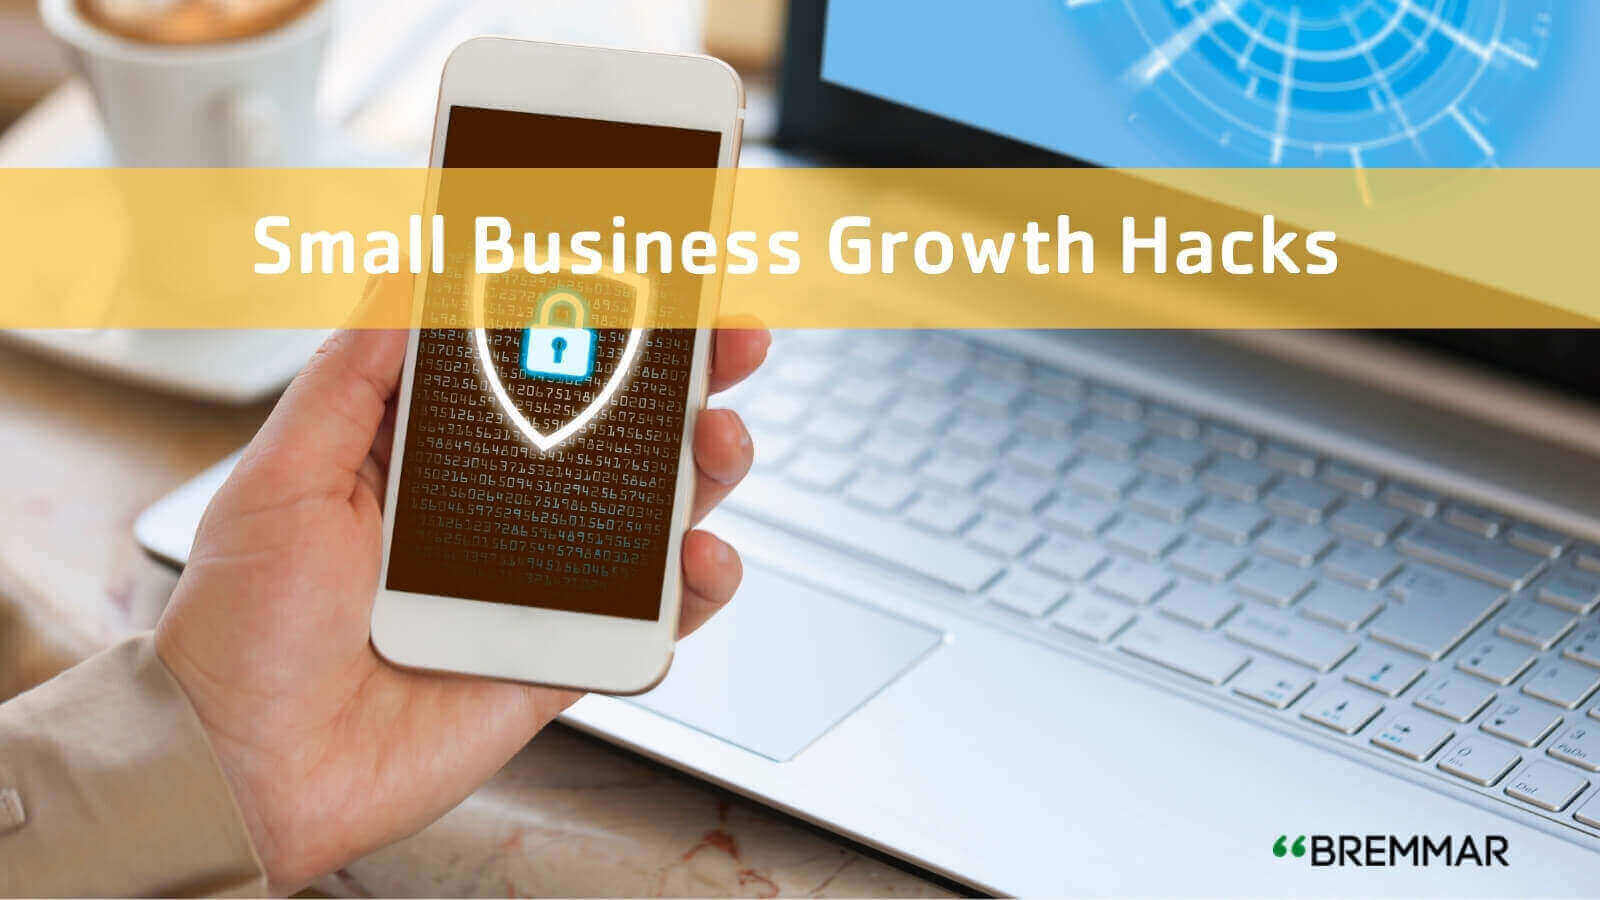 Small Business Growth Hacks: How to protect your business from cyber threats